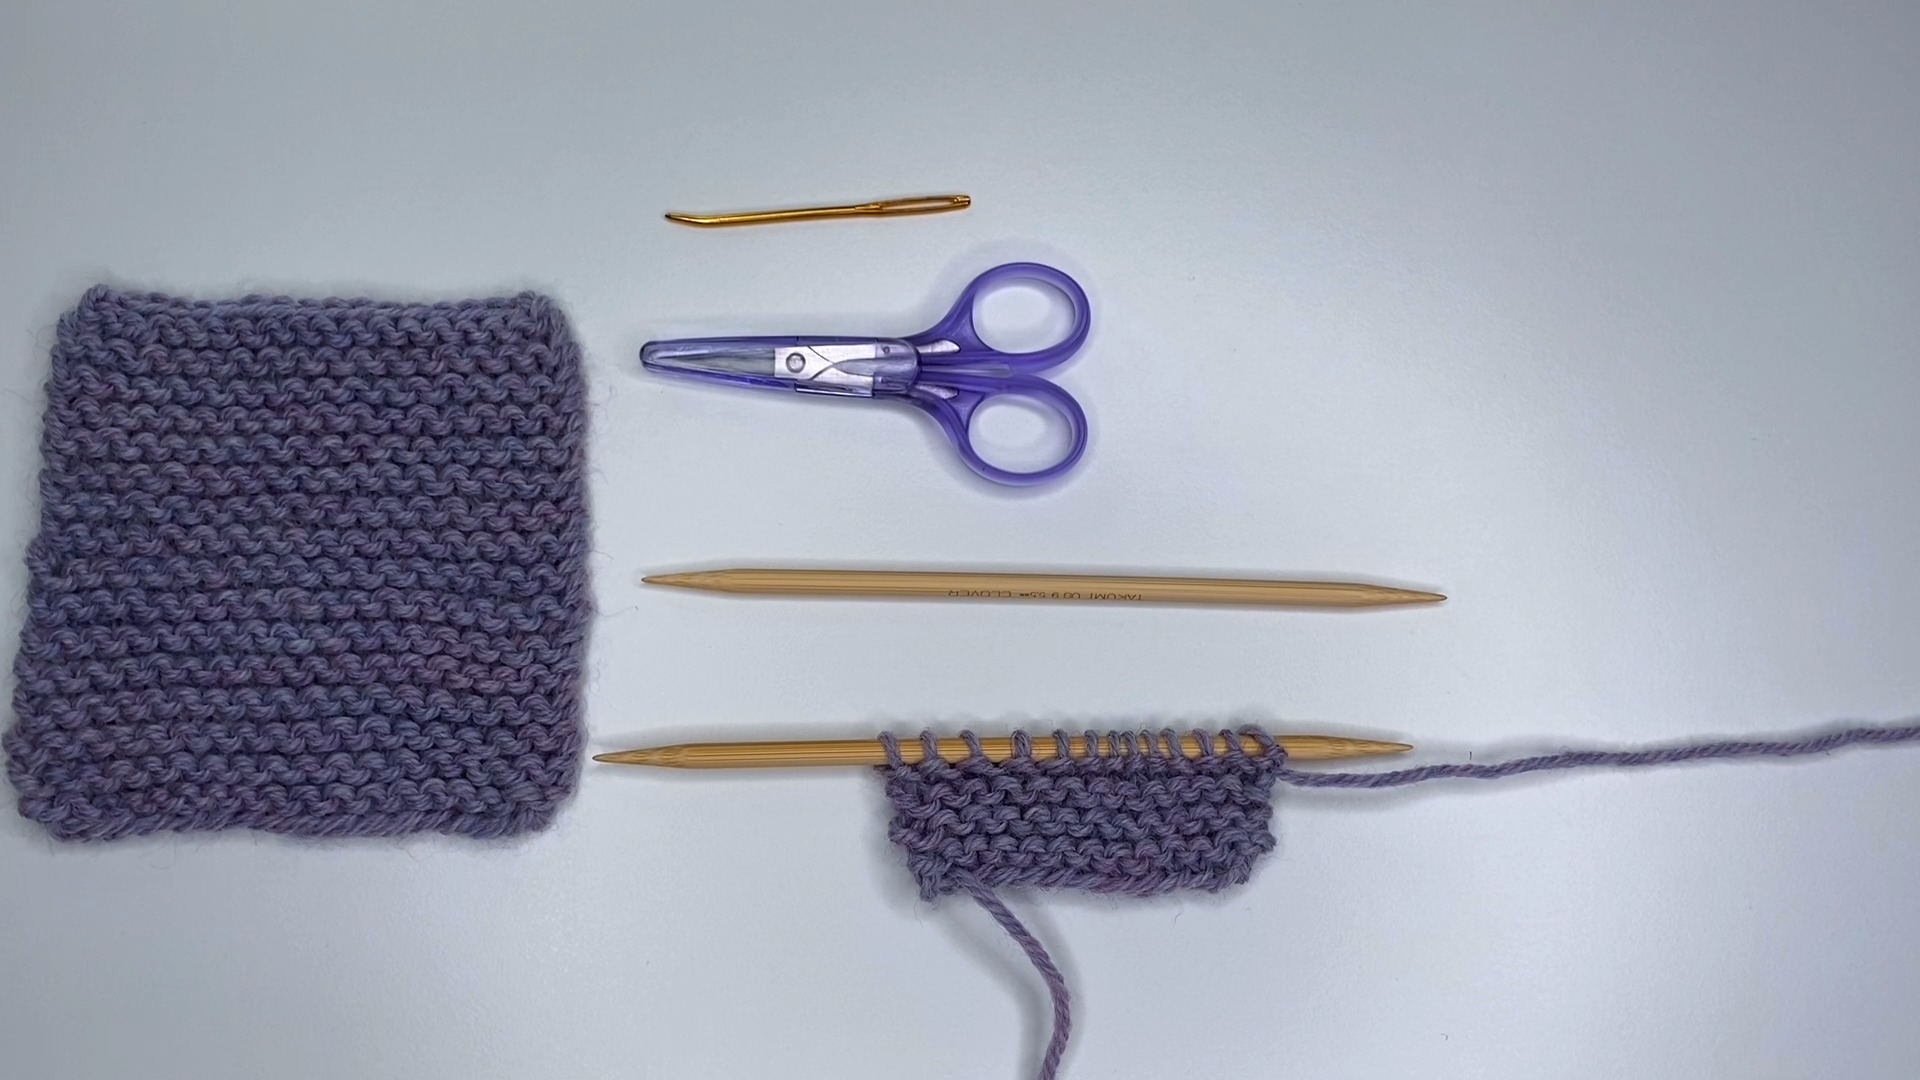 14-Day Learn to Knit Series: Day 7